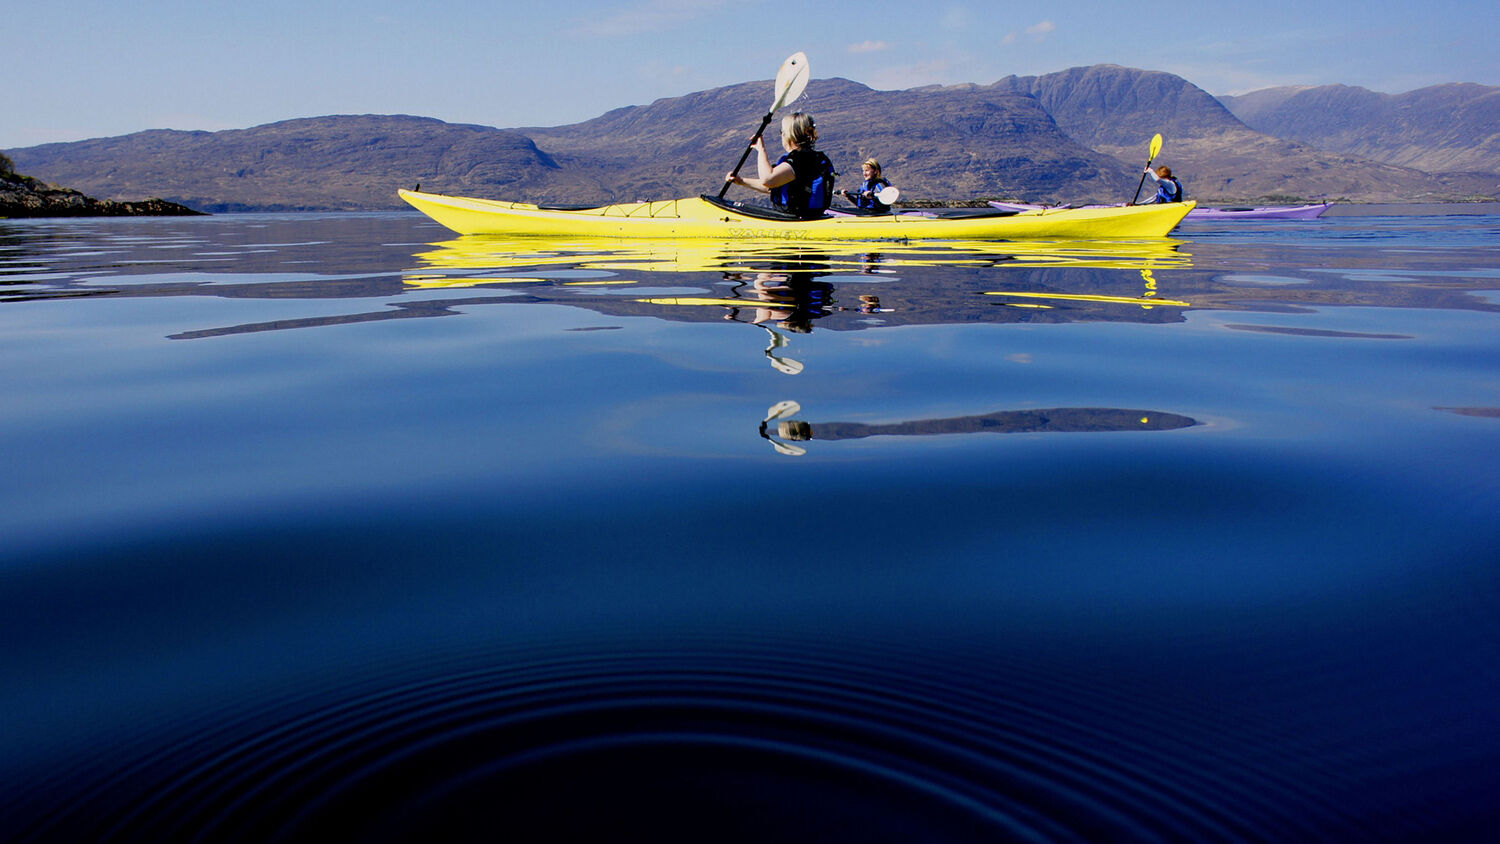 A group of people in yellow kayaks paddle through still blue water. The image is taken from the surface of the water. In the distance the tall mountains of Kintail rise into a clear blue sky.